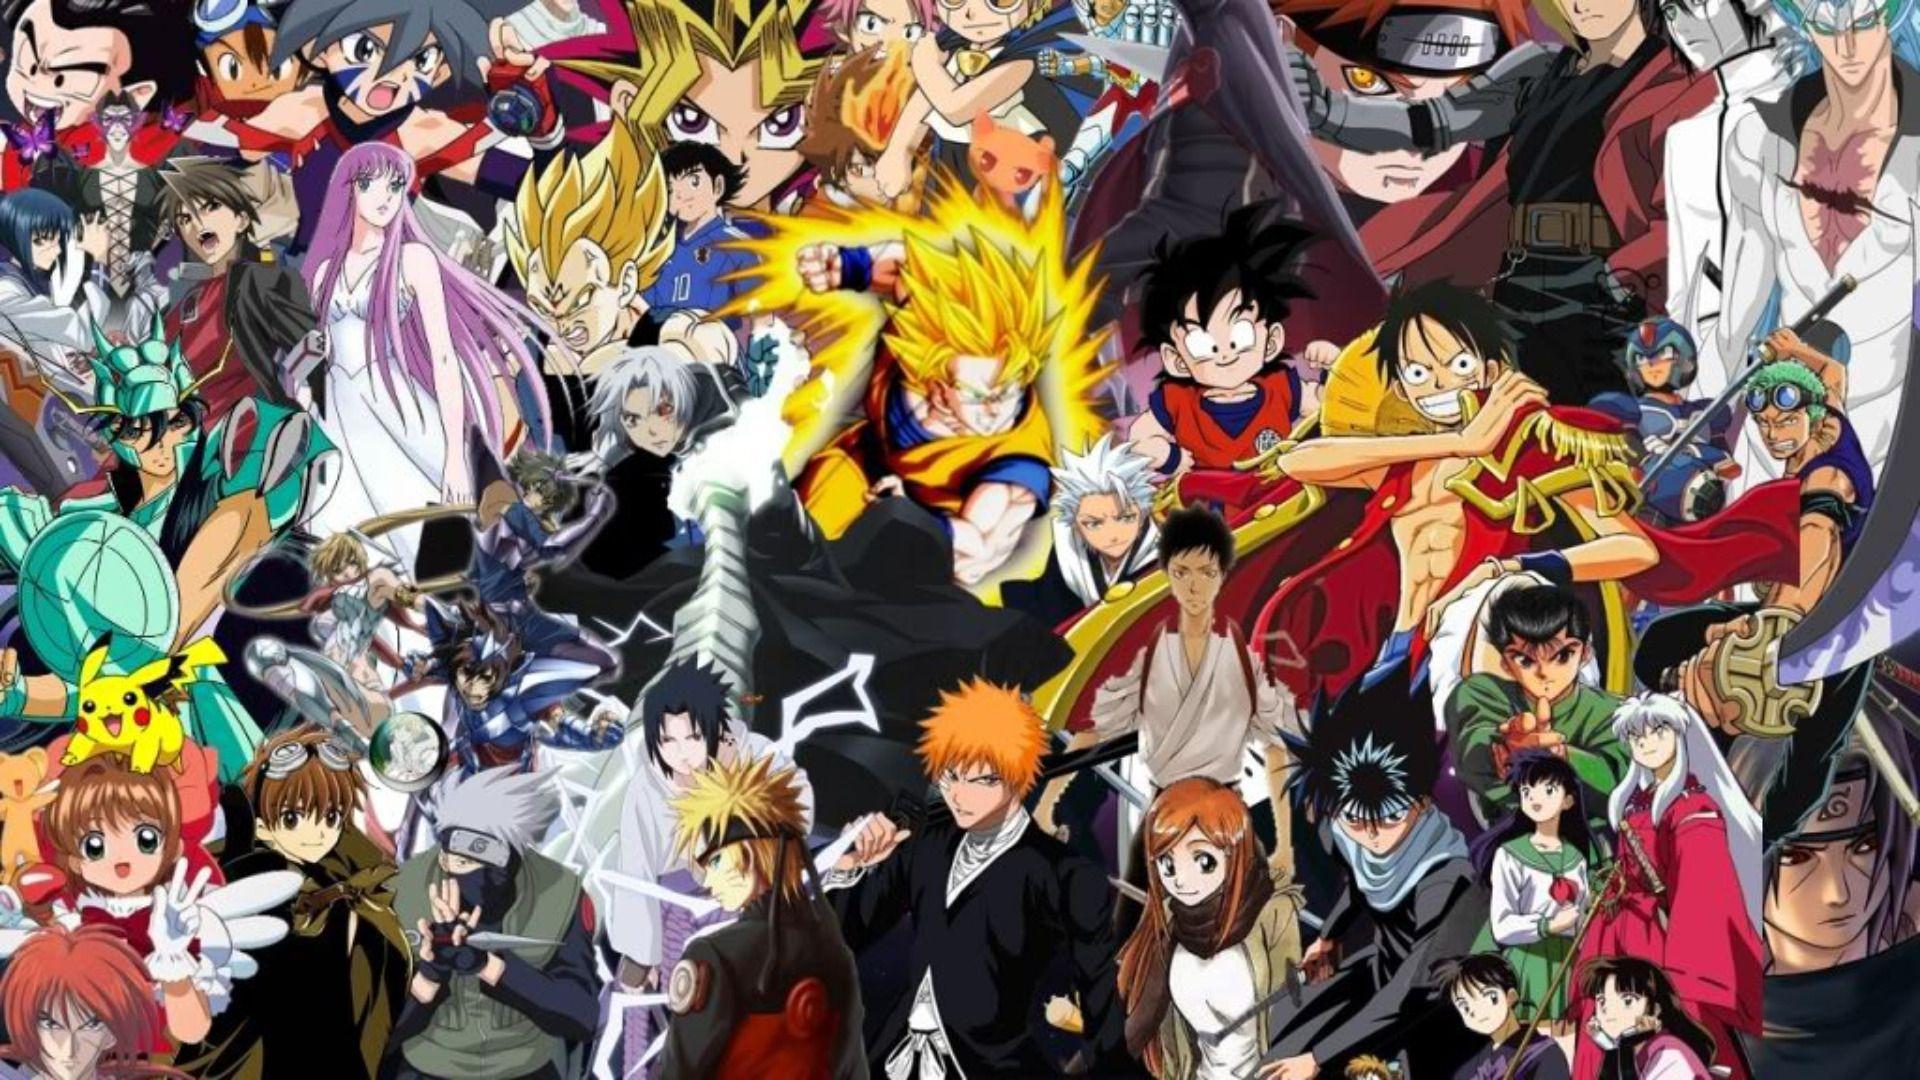 Famous Anime Characters Wallpapers - Top Free Famous Anime Characters ...